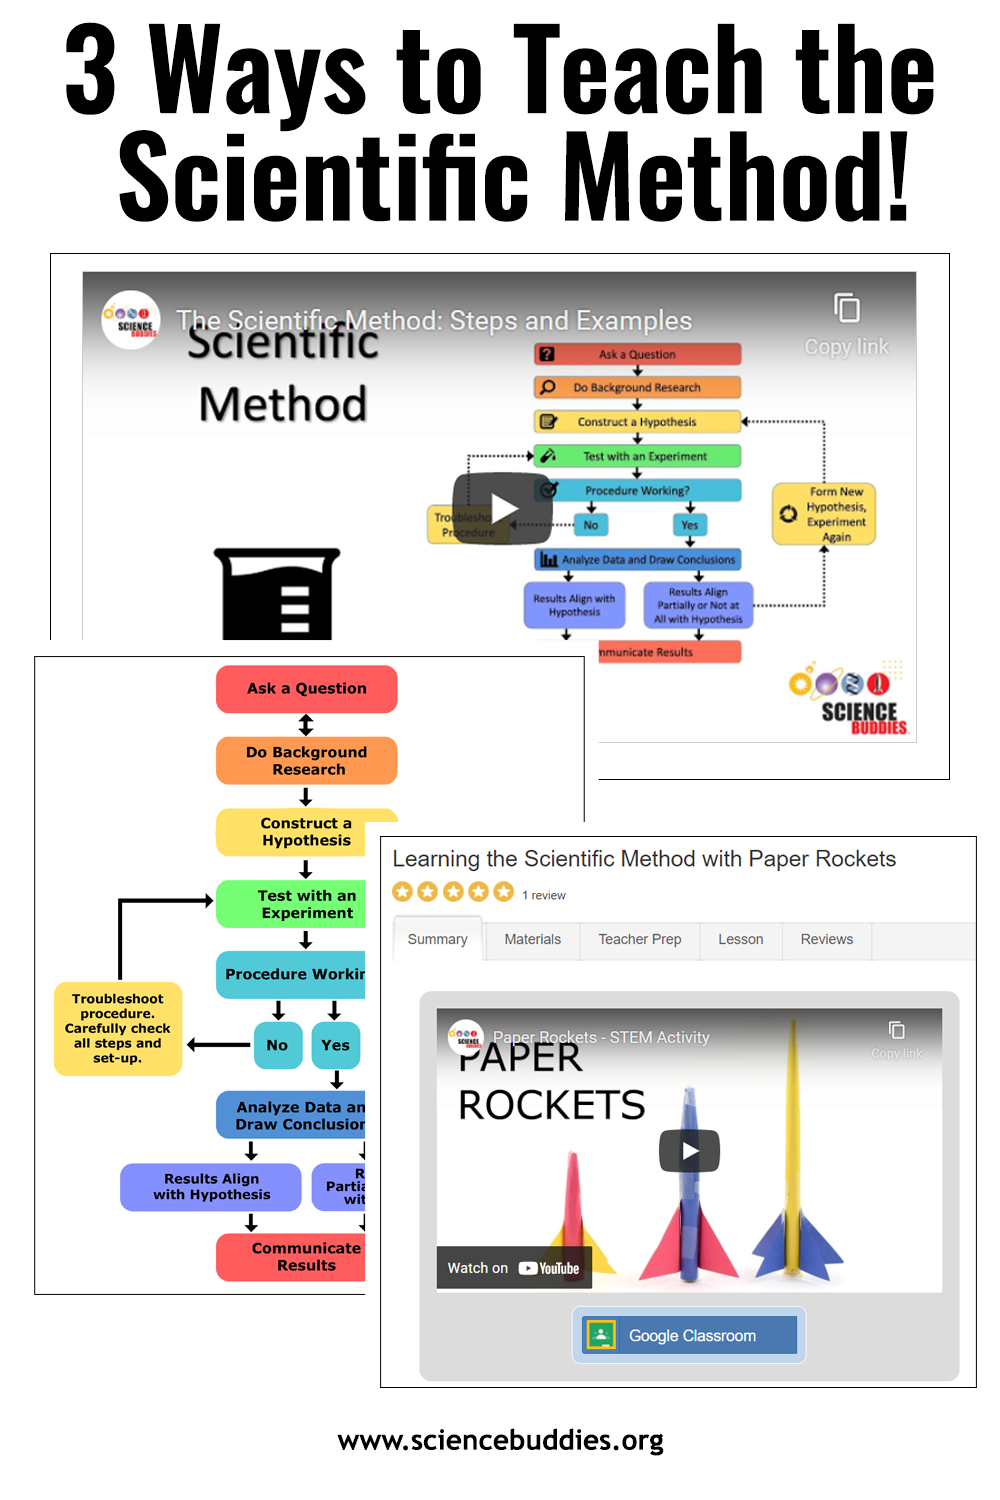 Scientific method video, scientific method project guide, and scientific method lessons - 3 ways to teach the scientific method to K-12 students